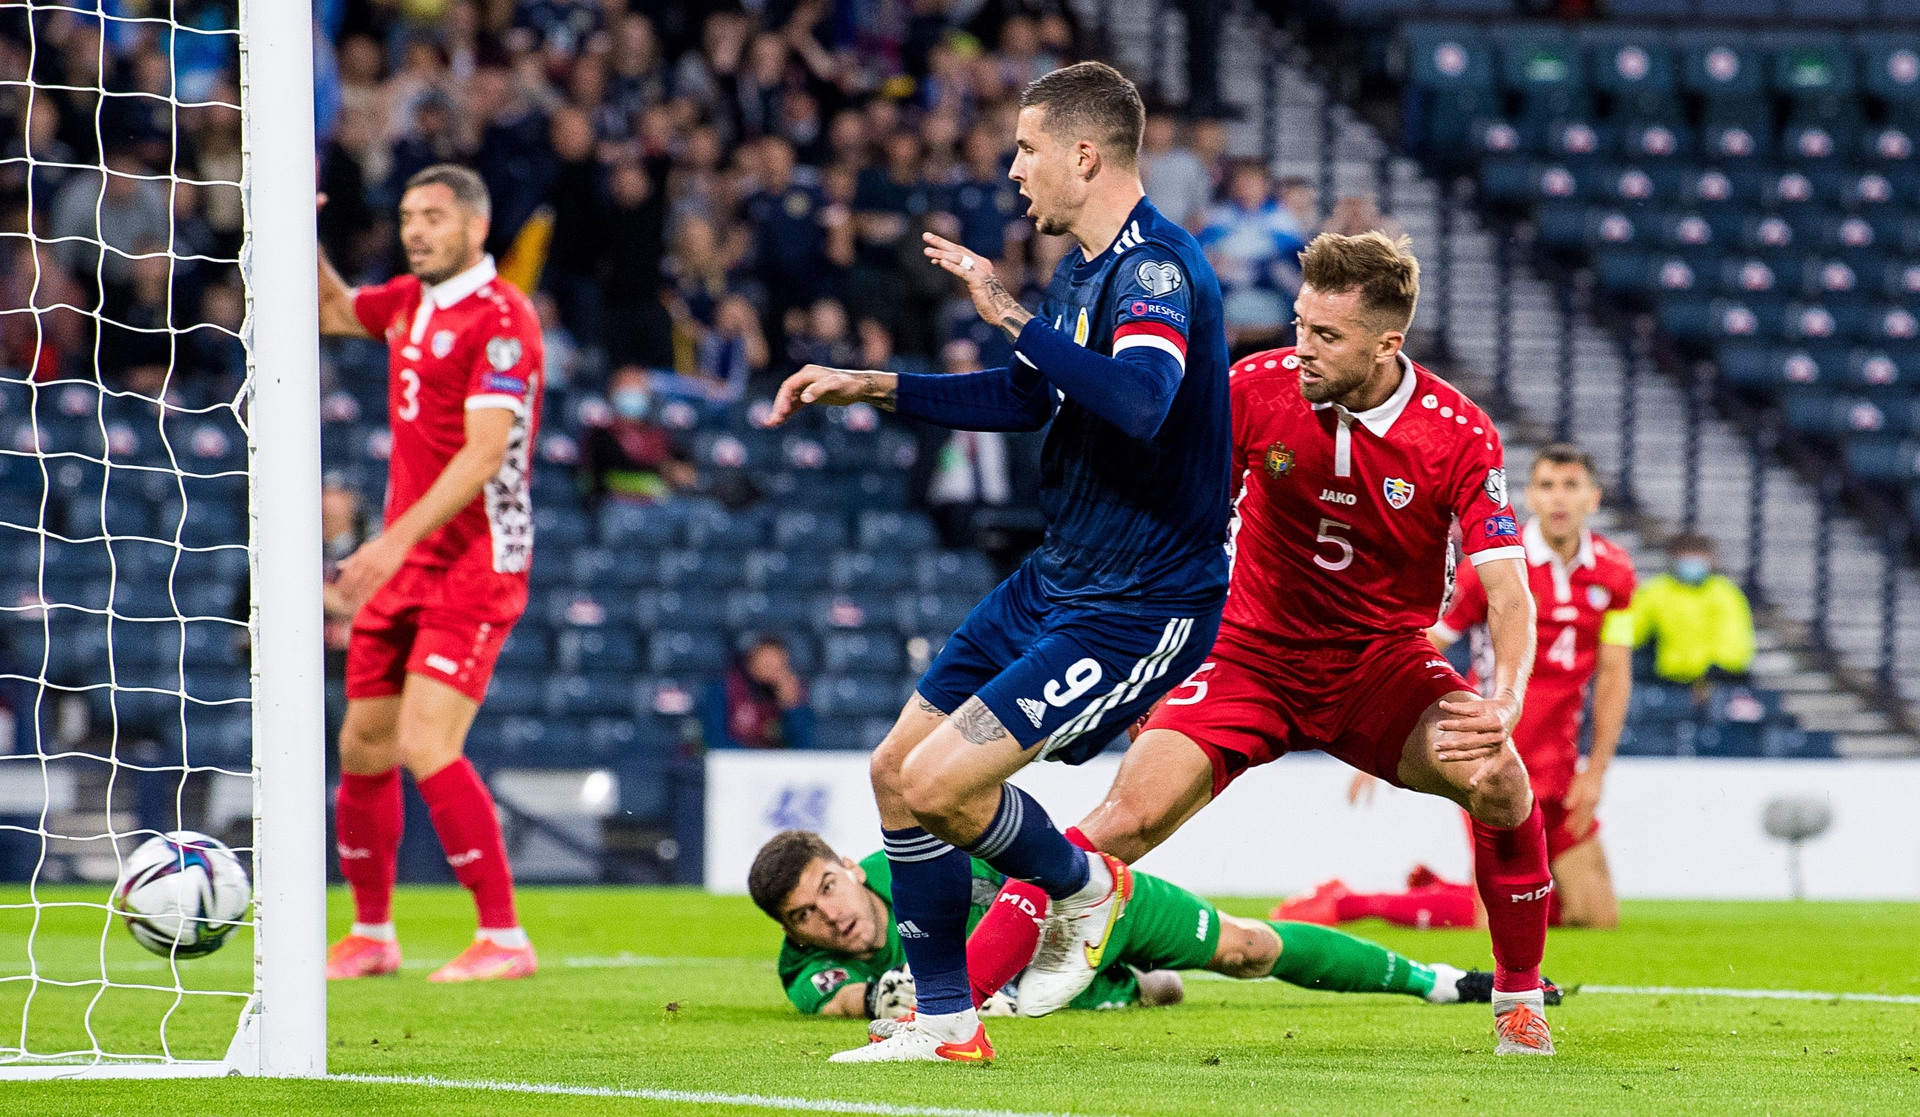 <strong>Nerves were seemingly settled at Hampden when Lyndon Dykes prodded home an early goal – but it became a long night for the Tartan Army as Scotland failed to put the Moldovans to the sword despite a string of good chances.</strong>”/><cite class=cite>SNS Group</cite></div><figcaption aria-hidden=true><strong>Nerves were seemingly settled at Hampden when Lyndon Dykes prodded home an early goal – but it became a long night for the Tartan Army as Scotland failed to put the Moldovans to the sword despite a string of good chances.</strong> <cite class=hidden>SNS Group</cite></figcaption></figure><h2 class=